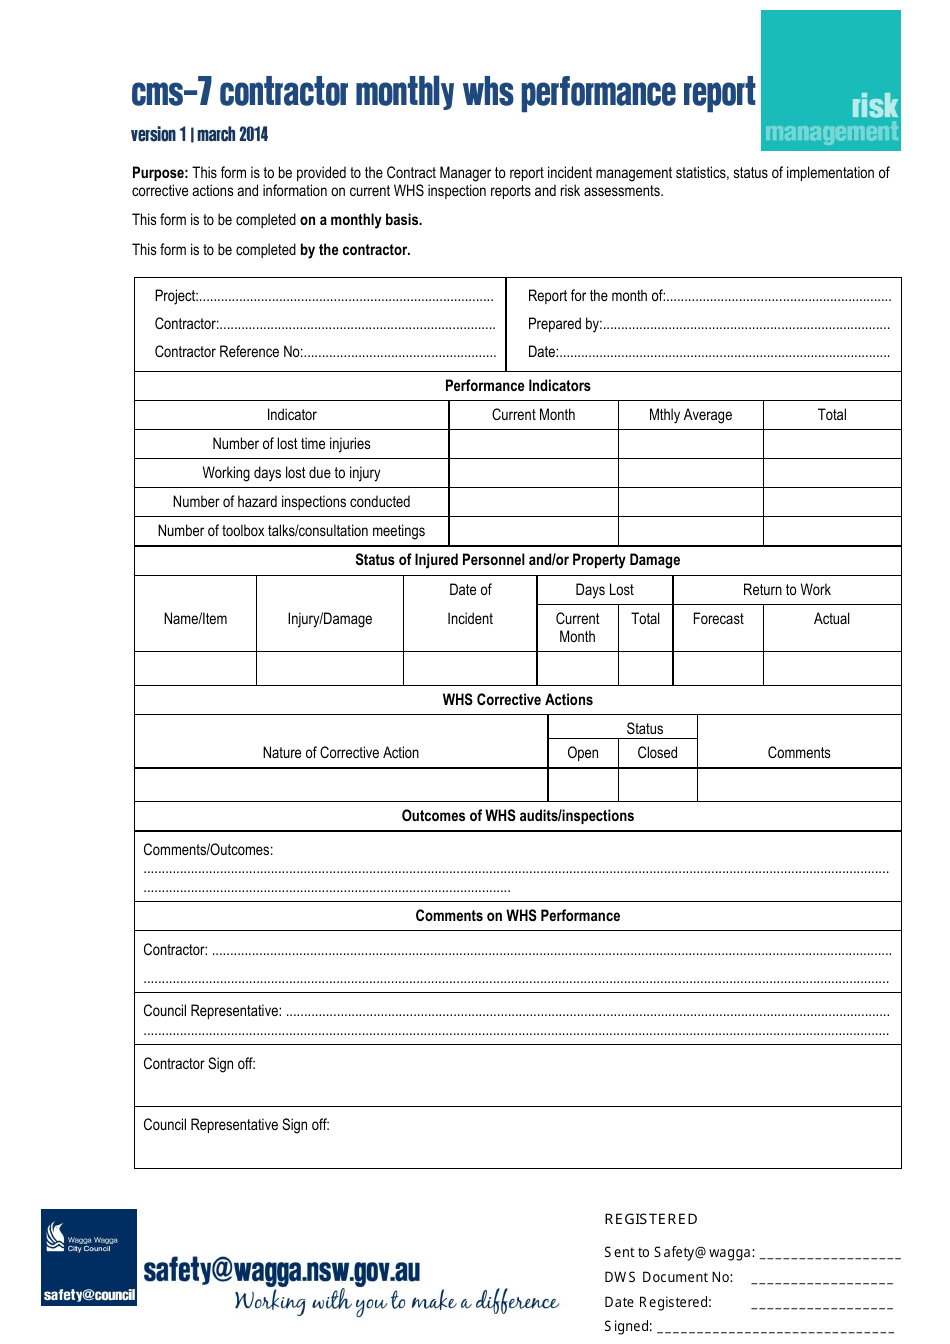 Cms-7 Contractor Monthly WHS Performance Report Template - Australia, Page 1